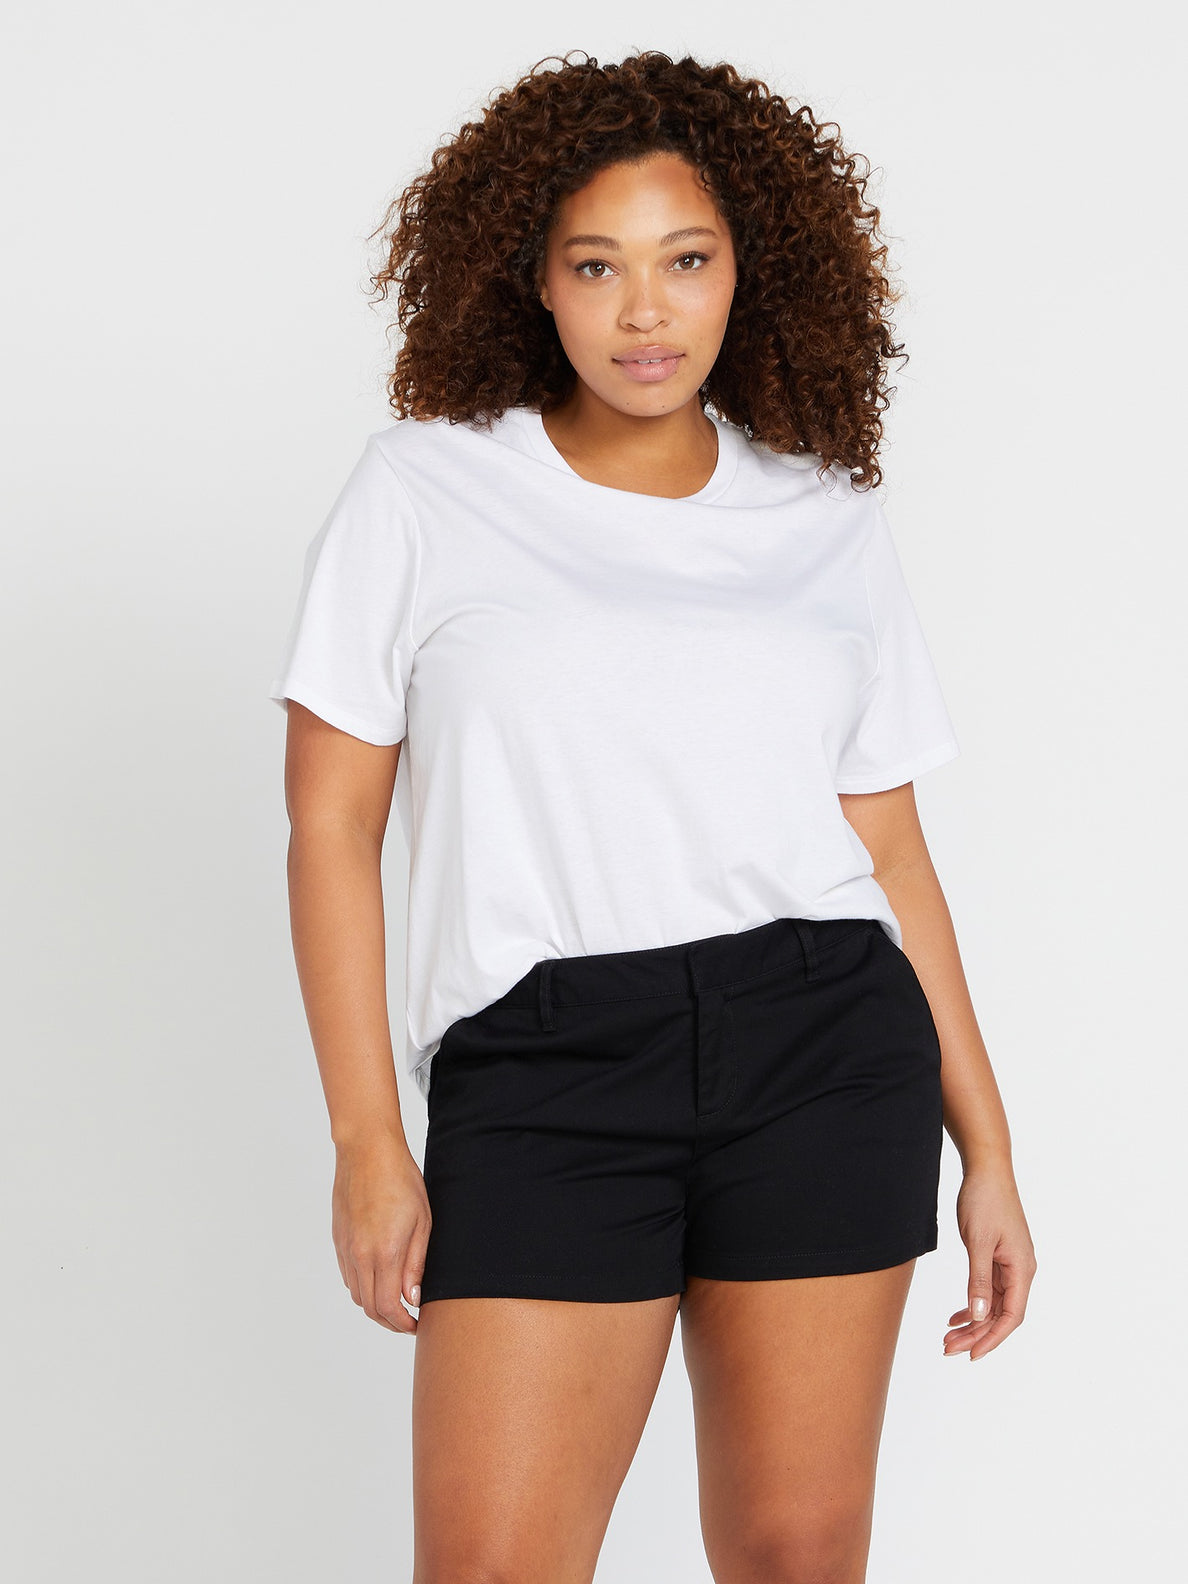 Frochickie Shorts - Black